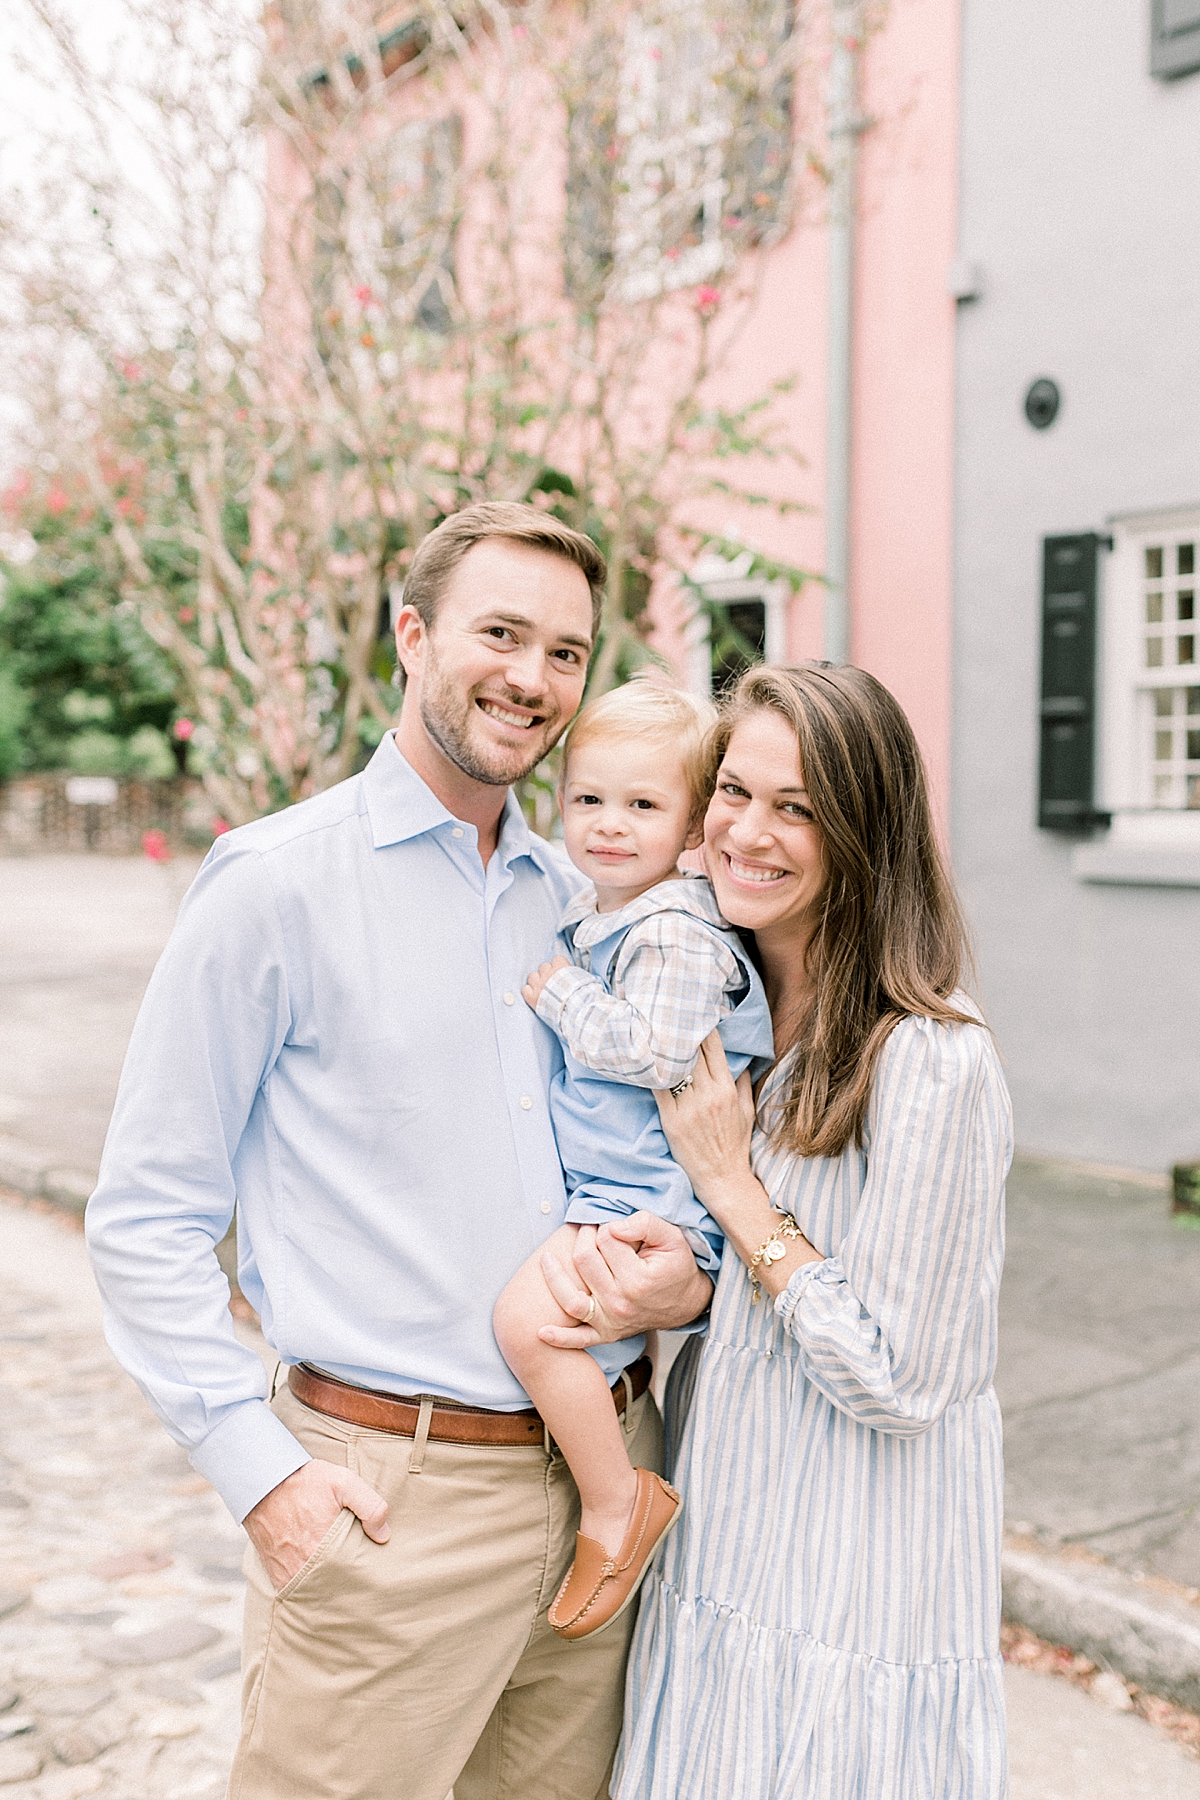 Family Photographer in Charleston, SC photographs family along the historic cobblestone streets while strolling through Downtown! Photos by Caitlyn Motycka Photography.